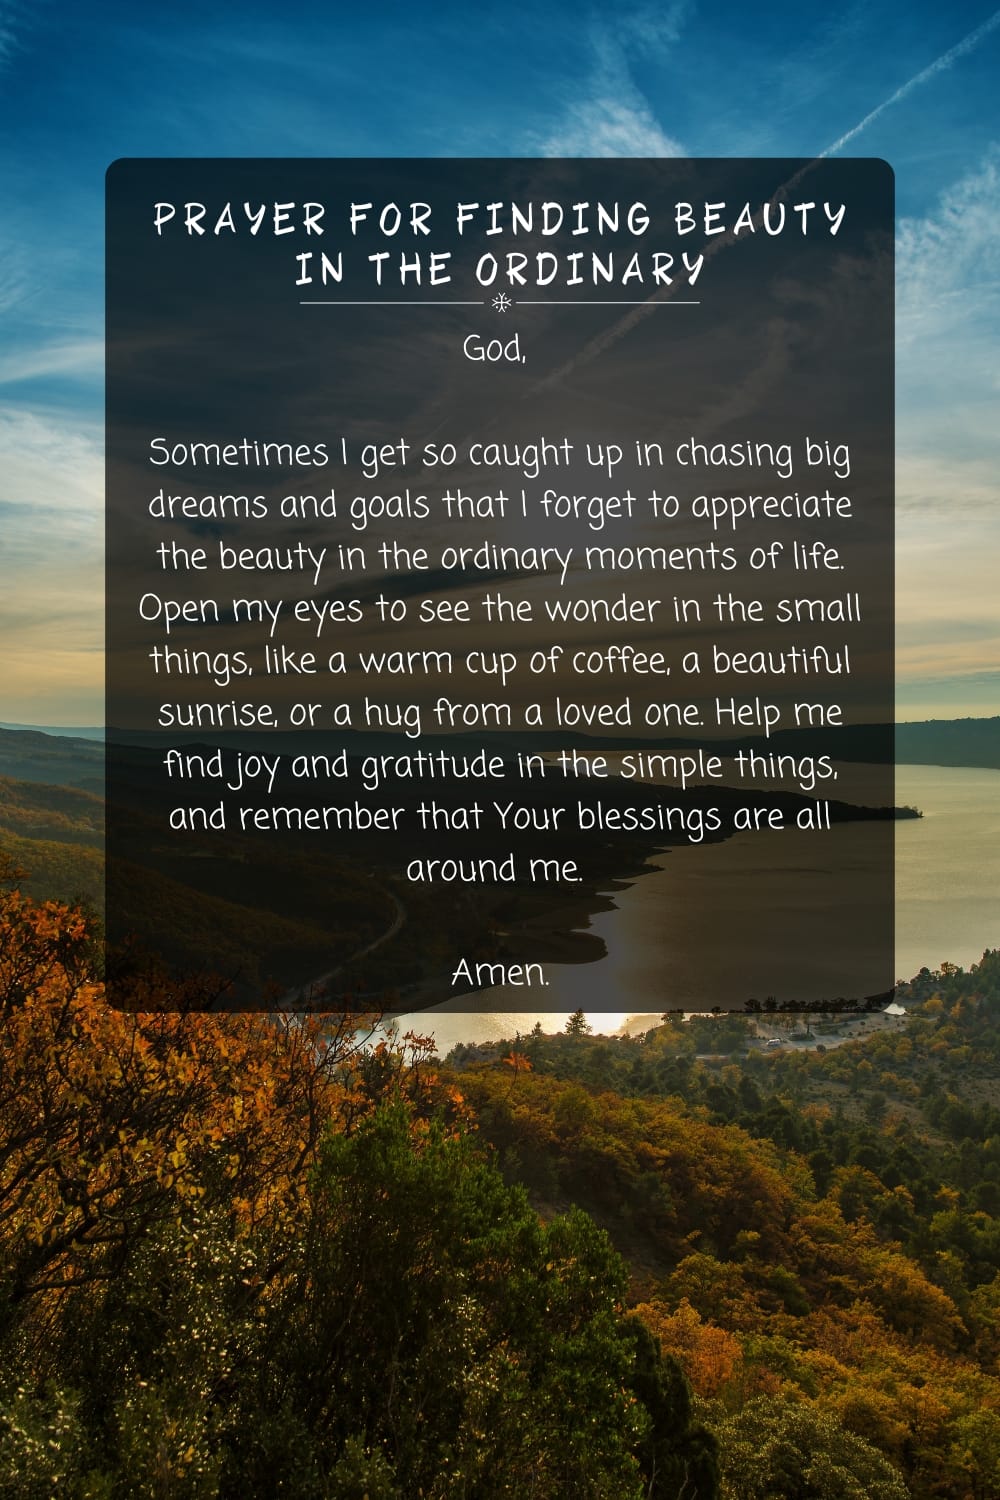 Prayer For Finding Beauty in the Ordinary